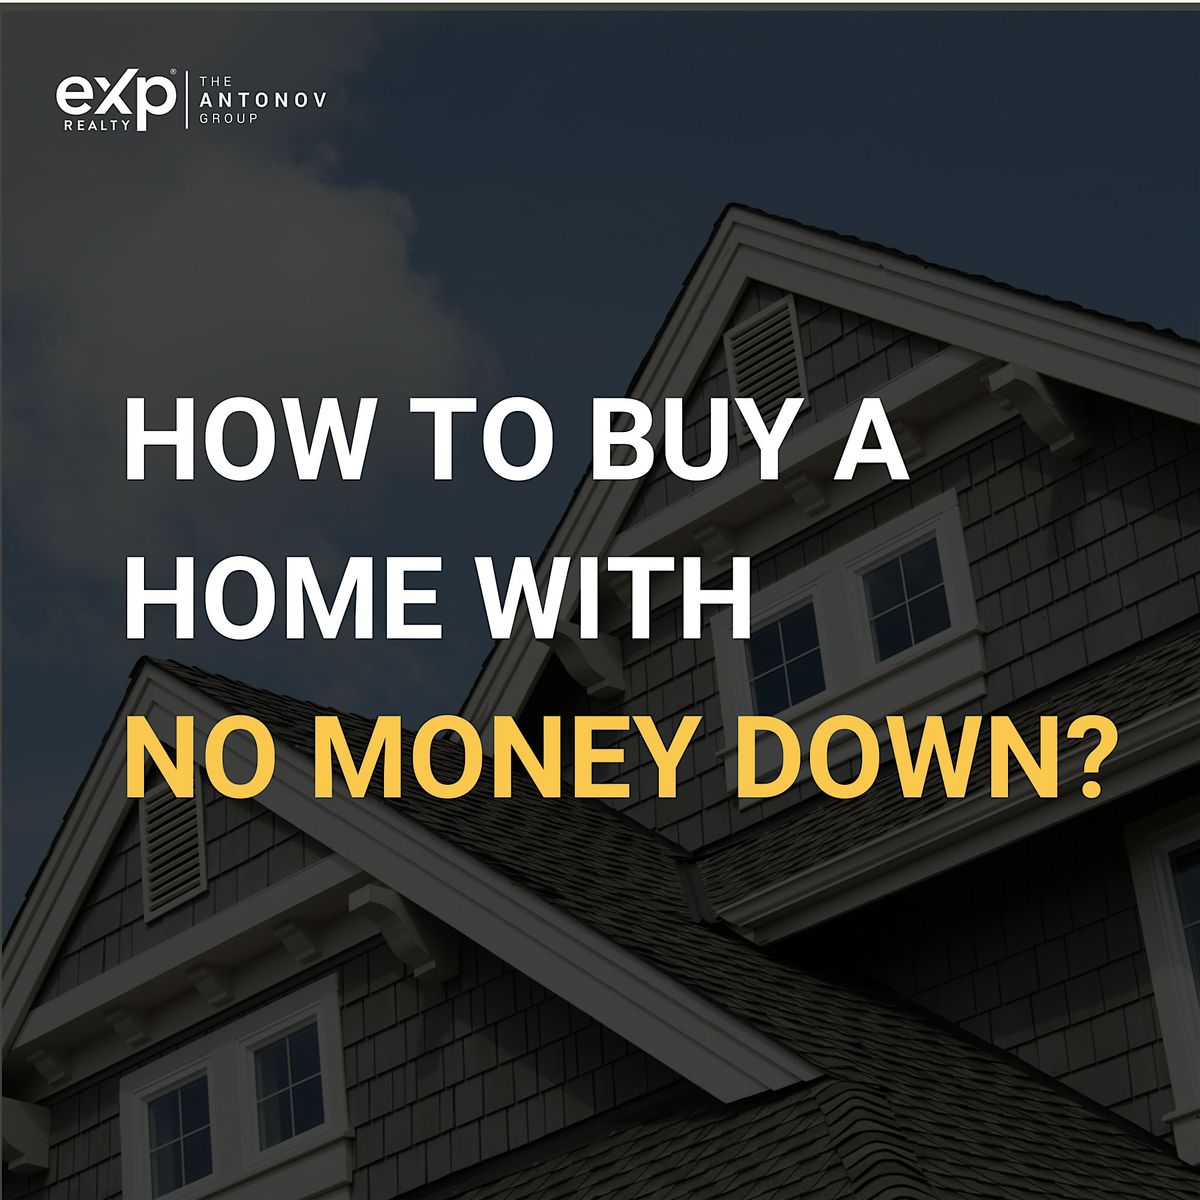 "HOW TO BUY A HOME WITH NO MONEY DOWN?"